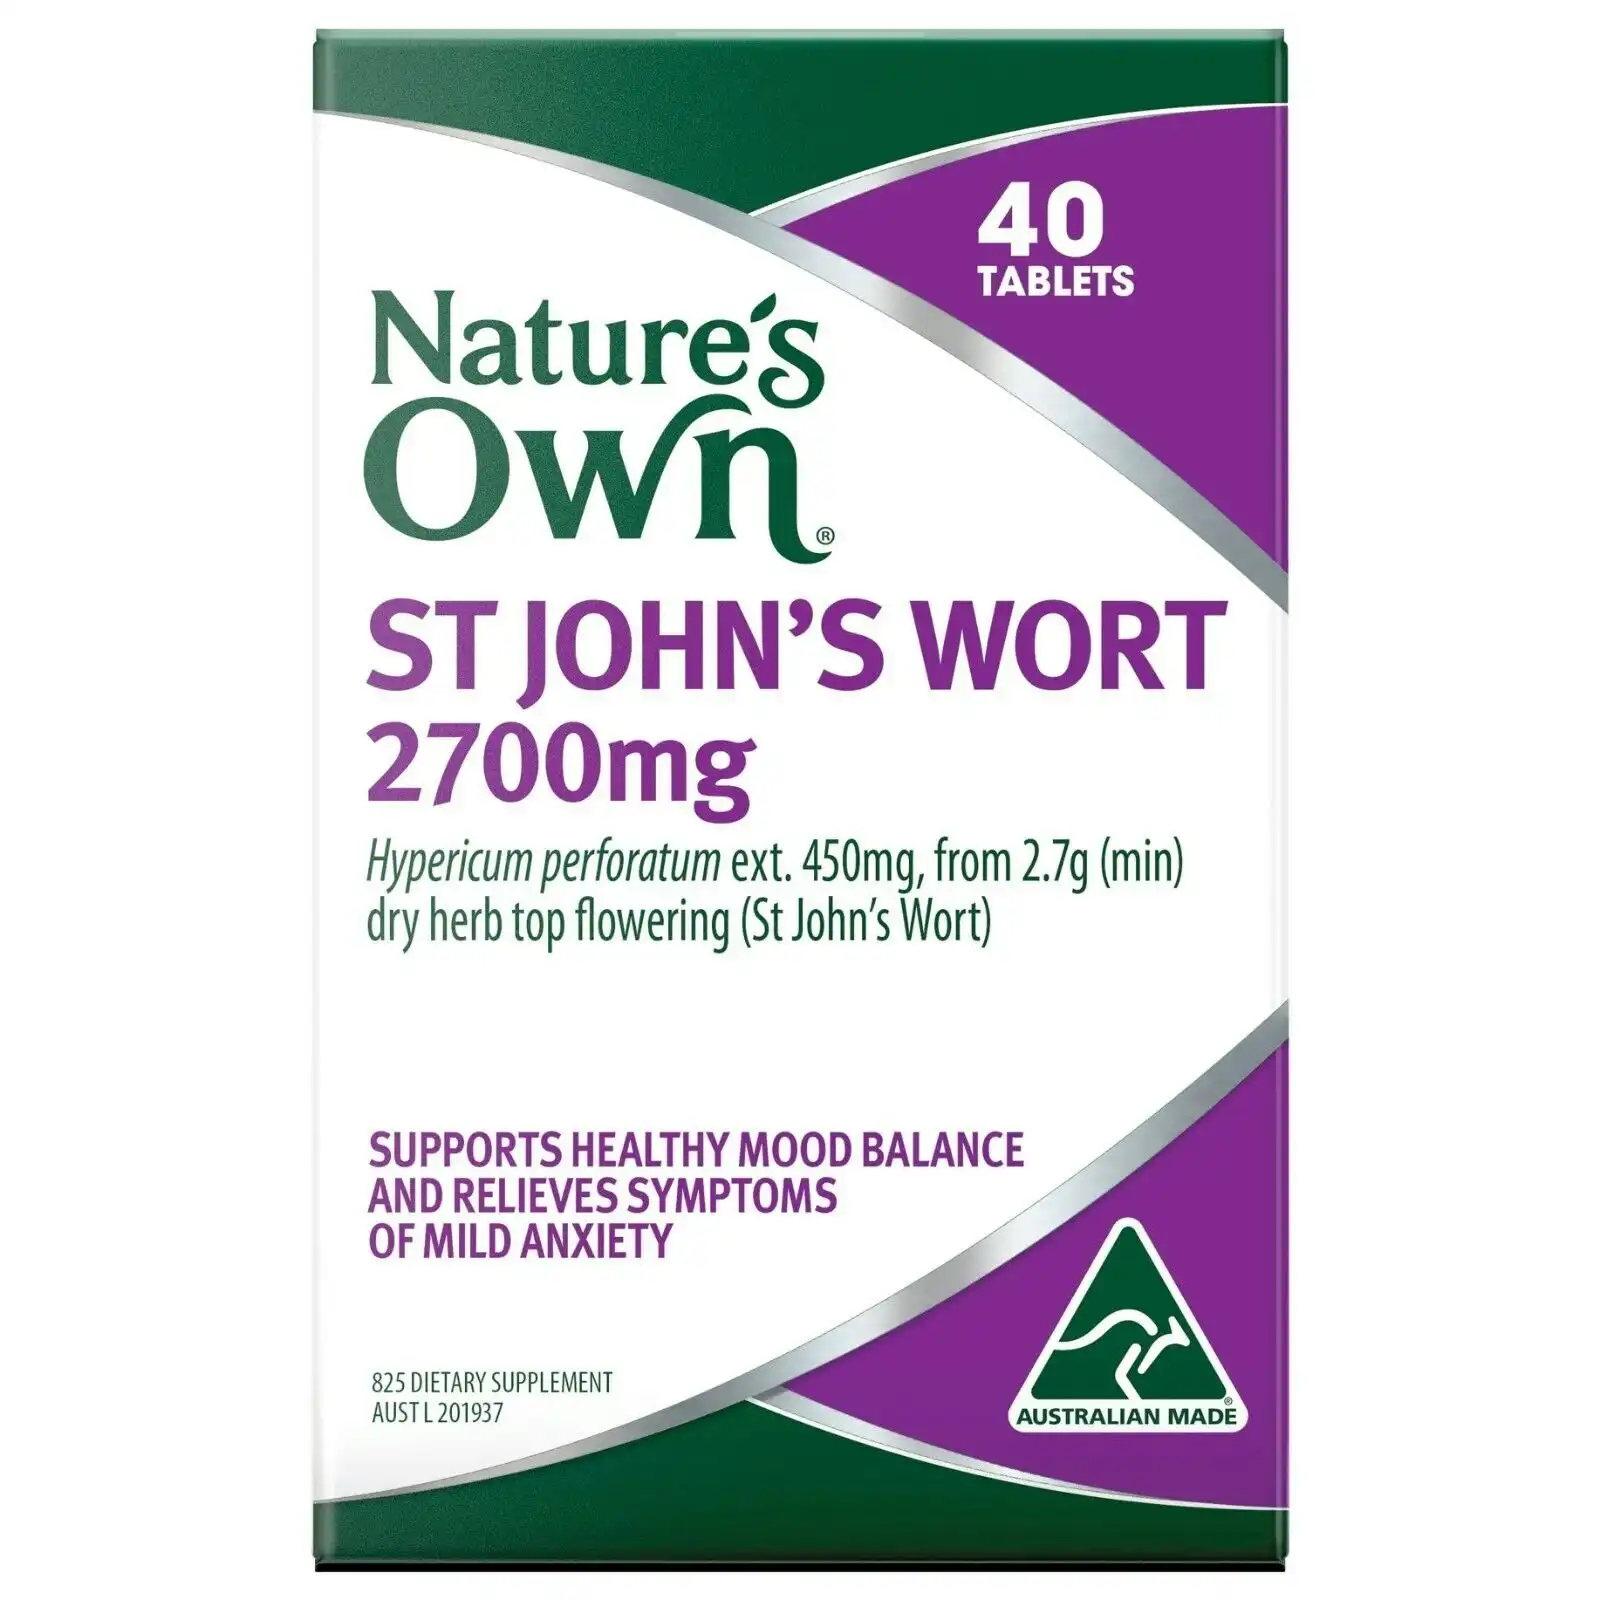 Nature's Own St John's Wort 2700mg 40 Tablets Mood Natures Own St Johns Wort